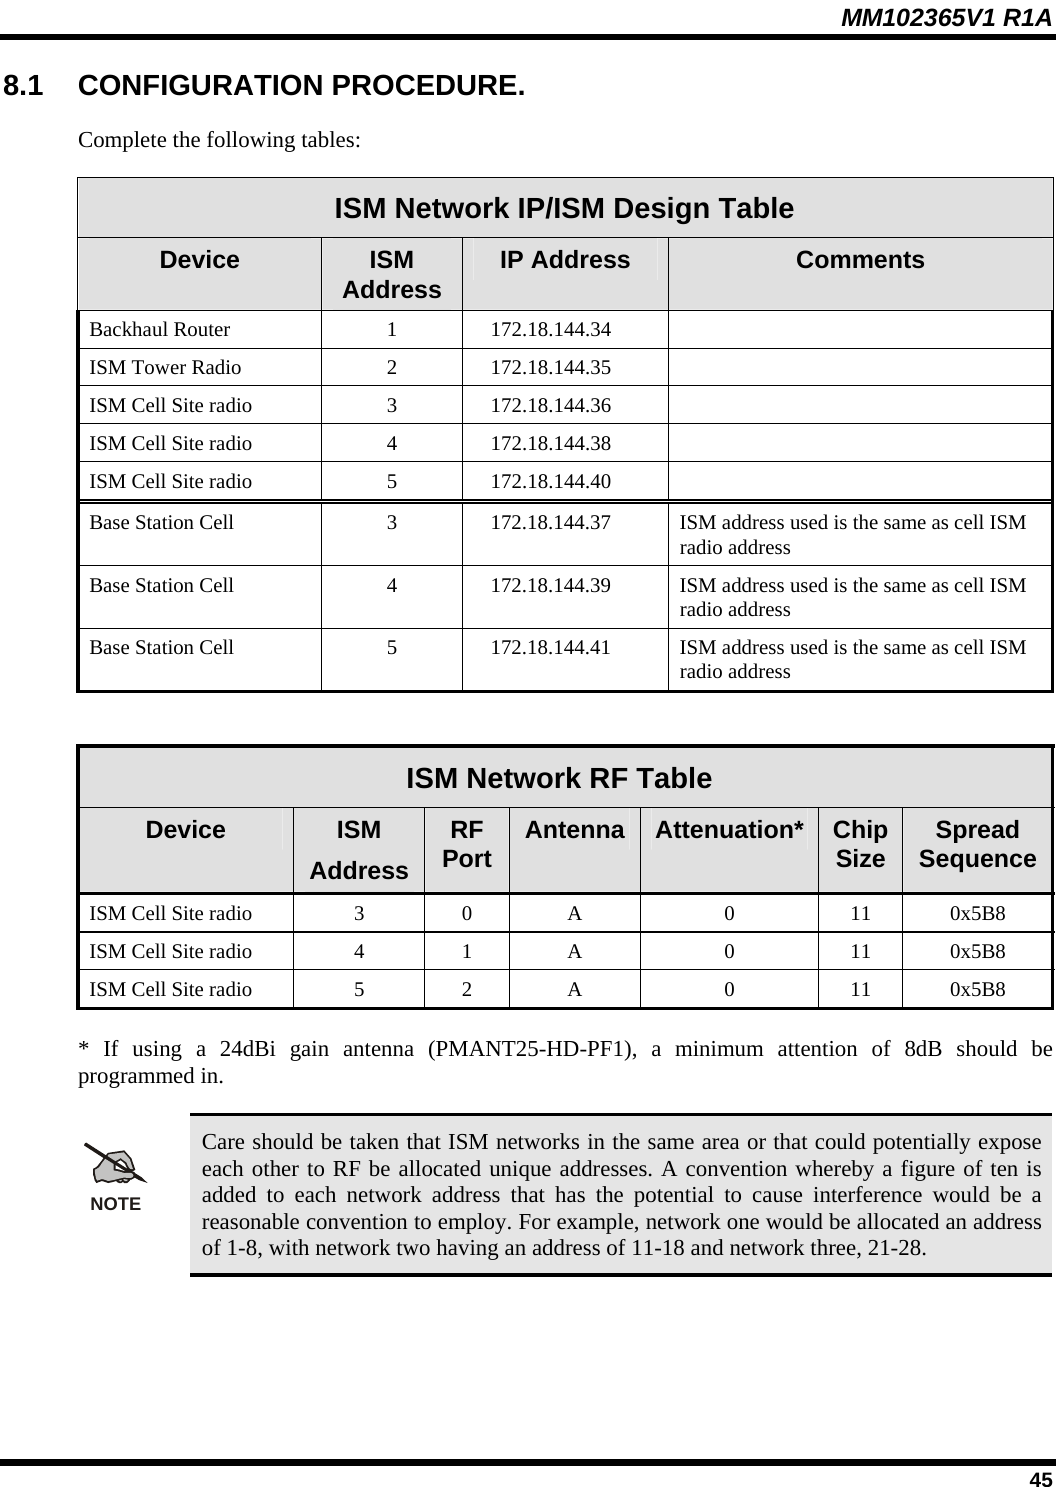 MM102365V1 R1A 8.1 CONFIGURATION PROCEDURE. Complete the following tables:  ISM Network IP/ISM Design Table Device  ISM Address  IP Address  Comments Backhaul Router  1  172.18.144.34   ISM Tower Radio  2  172.18.144.35   ISM Cell Site radio  3  172.18.144.36   ISM Cell Site radio  4  172.18.144.38   ISM Cell Site radio  5  172.18.144.40   Base Station Cell  3  172.18.144.37  ISM address used is the same as cell ISM radio address Base Station Cell  4  172.18.144.39  ISM address used is the same as cell ISM radio address Base Station Cell  5  172.18.144.41  ISM address used is the same as cell ISM radio address   ISM Network RF Table Device  ISM Address RF Port  Antenna  Attenuation*  Chip Size  Spread Sequence ISM Cell Site radio  3  0  A  0  11  0x5B8 ISM Cell Site radio  4  1  A  0  11  0x5B8 ISM Cell Site radio  5  2  A  0  11  0x5B8 * If using a 24dBi gain antenna (PMANT25-HD-PF1), a minimum attention of 8dB should be programmed in.  NOTE Care should be taken that ISM networks in the same area or that could potentially expose each other to RF be allocated unique addresses. A convention whereby a figure of ten is added to each network address that has the potential to cause interference would be a reasonable convention to employ. For example, network one would be allocated an address of 1-8, with network two having an address of 11-18 and network three, 21-28.    45 